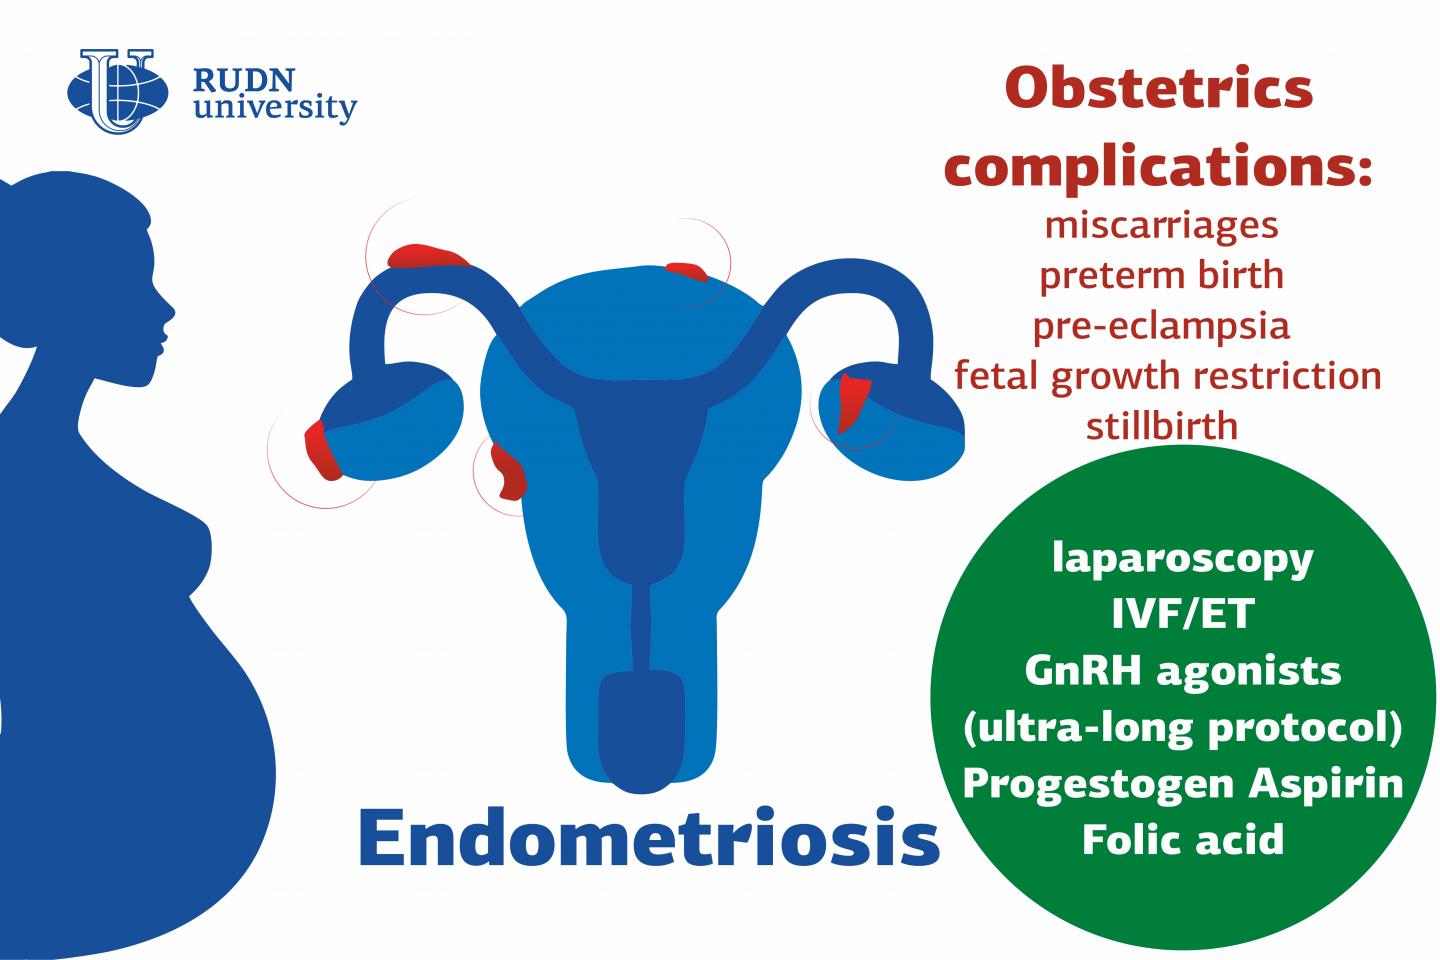 Doctors from RUDN University Suggested Ways to Reduce Obstetrical Complications in Patients with Endometriosis